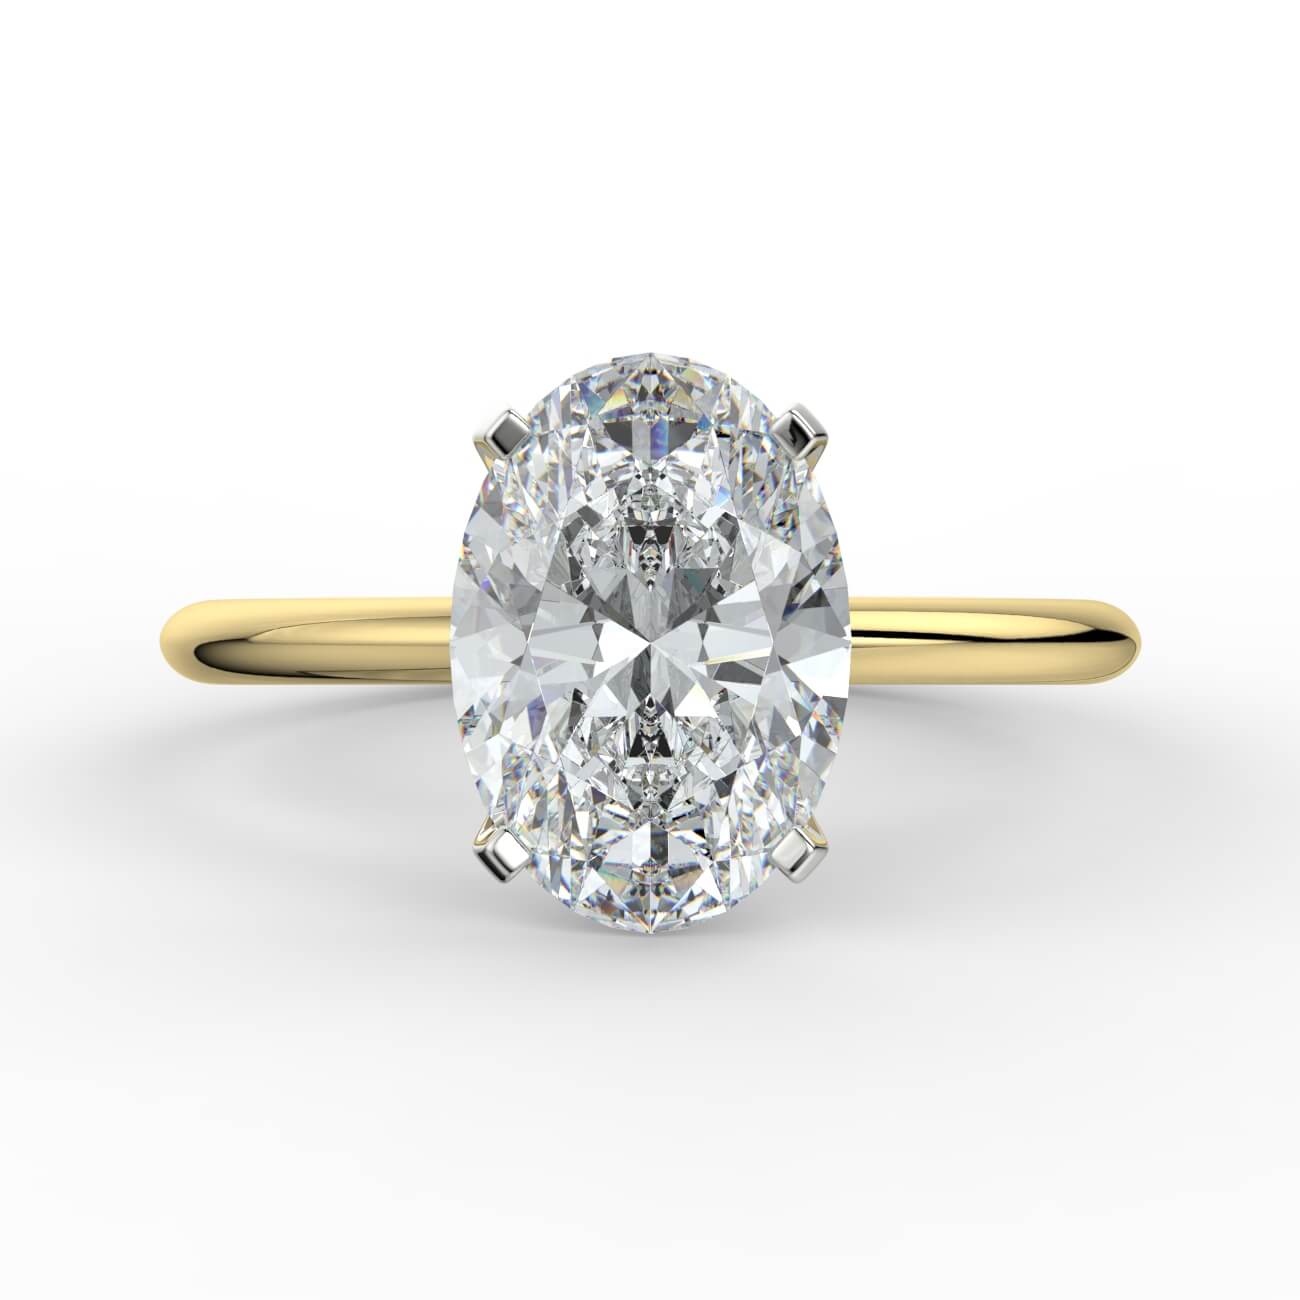 Tapering Solitaire Engagement Ring in yellow and white gold – Australian Diamond Network